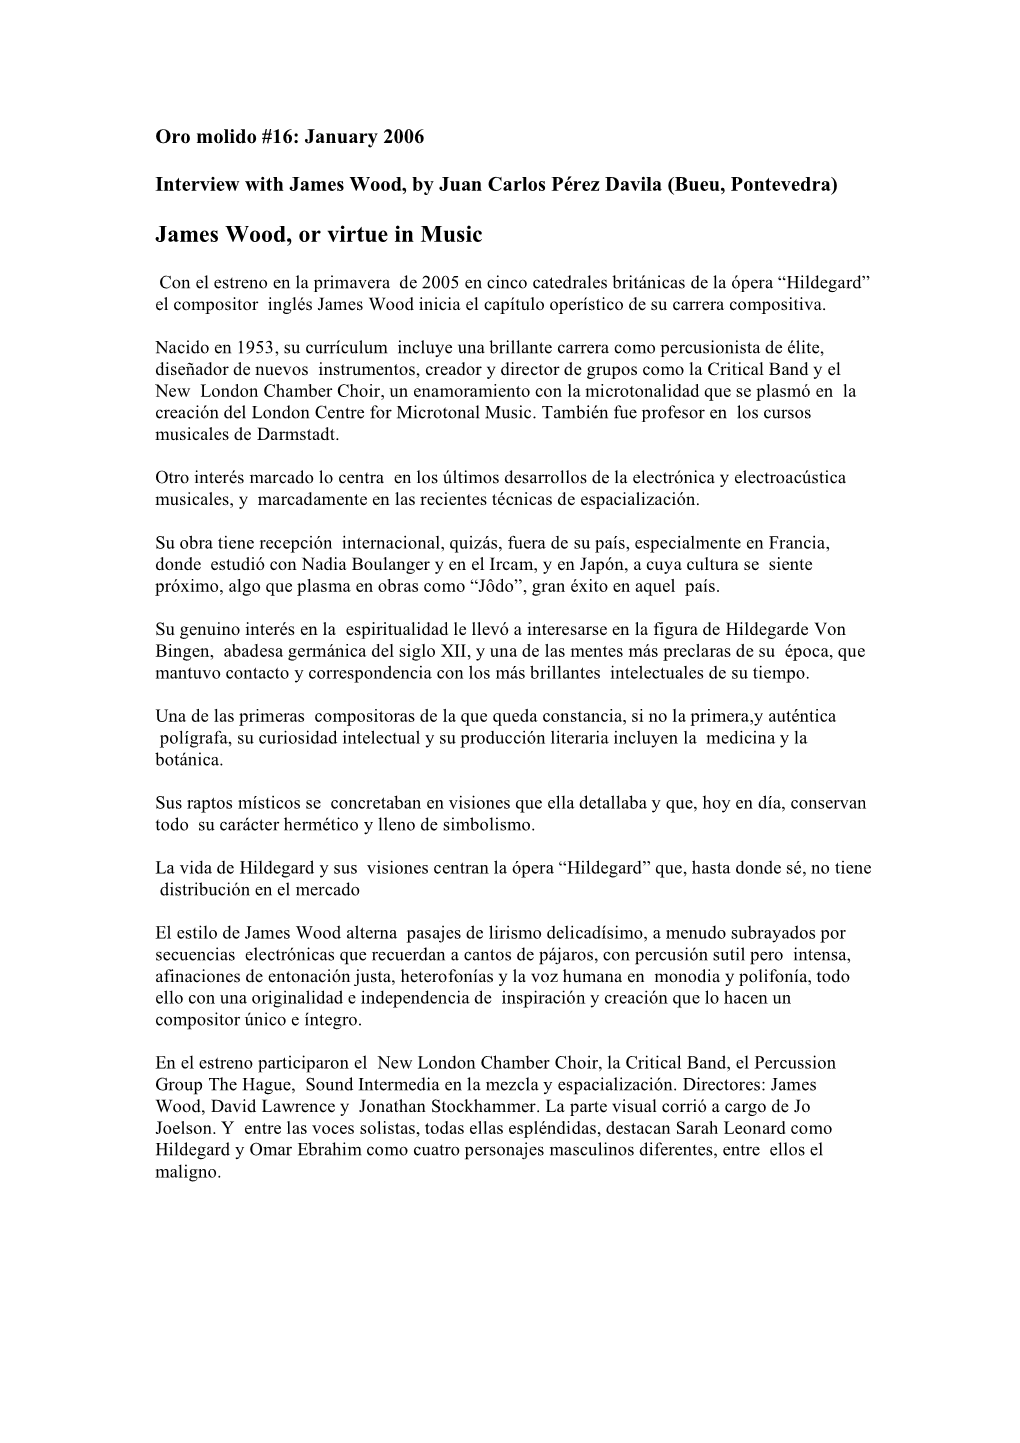 James Wood, Or Virtue in Music